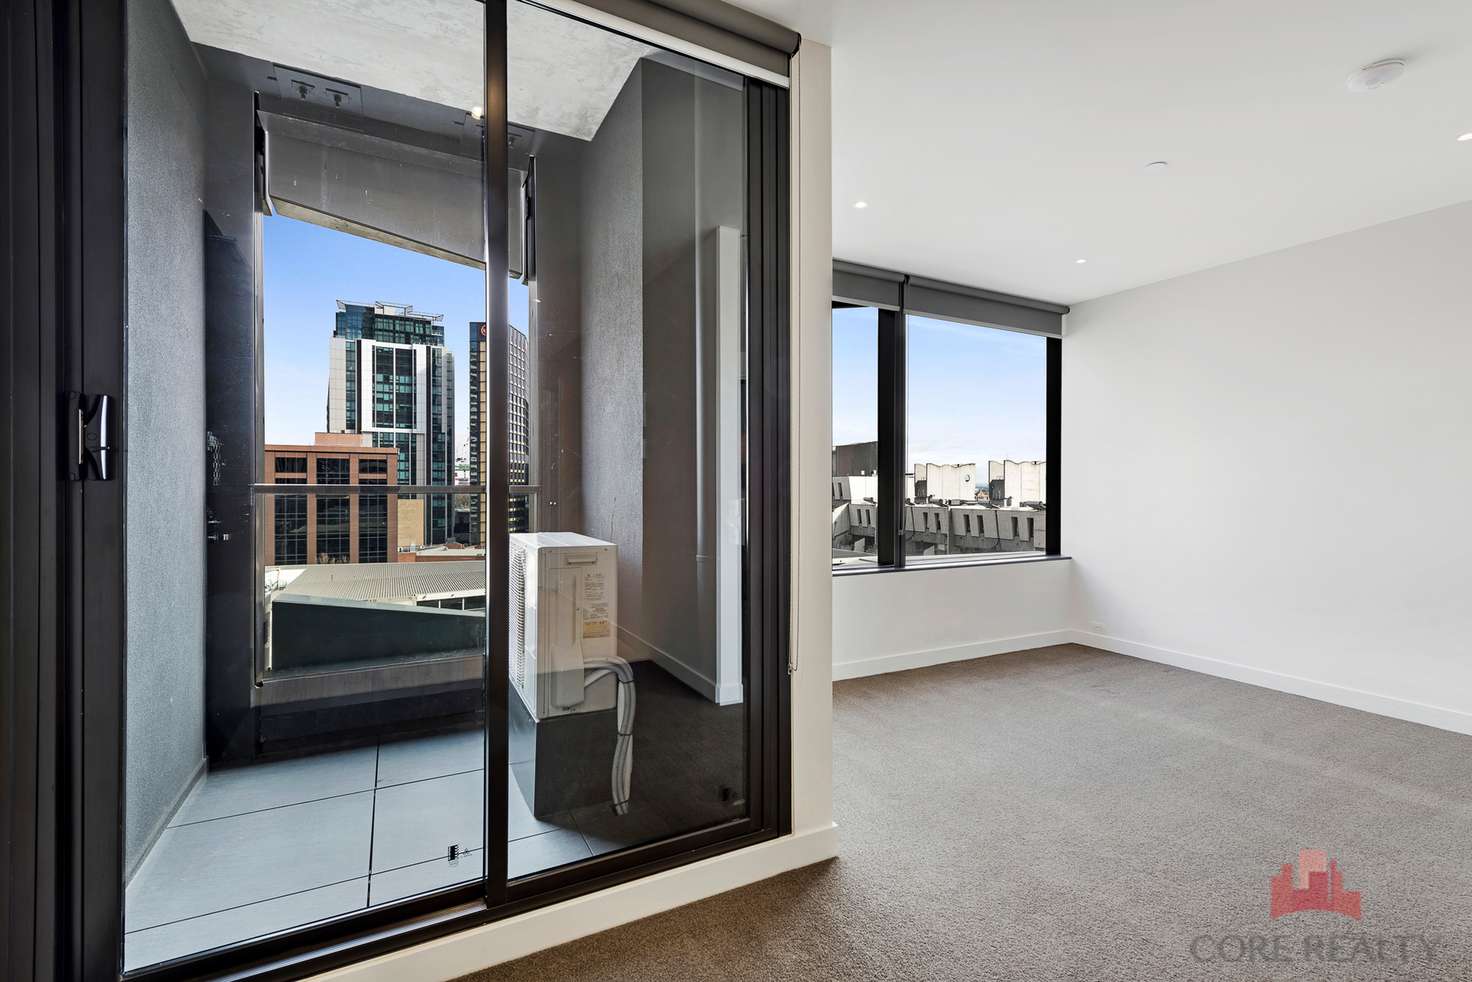 Main view of Homely apartment listing, 1113/120 Abeckett Street, Melbourne VIC 3000